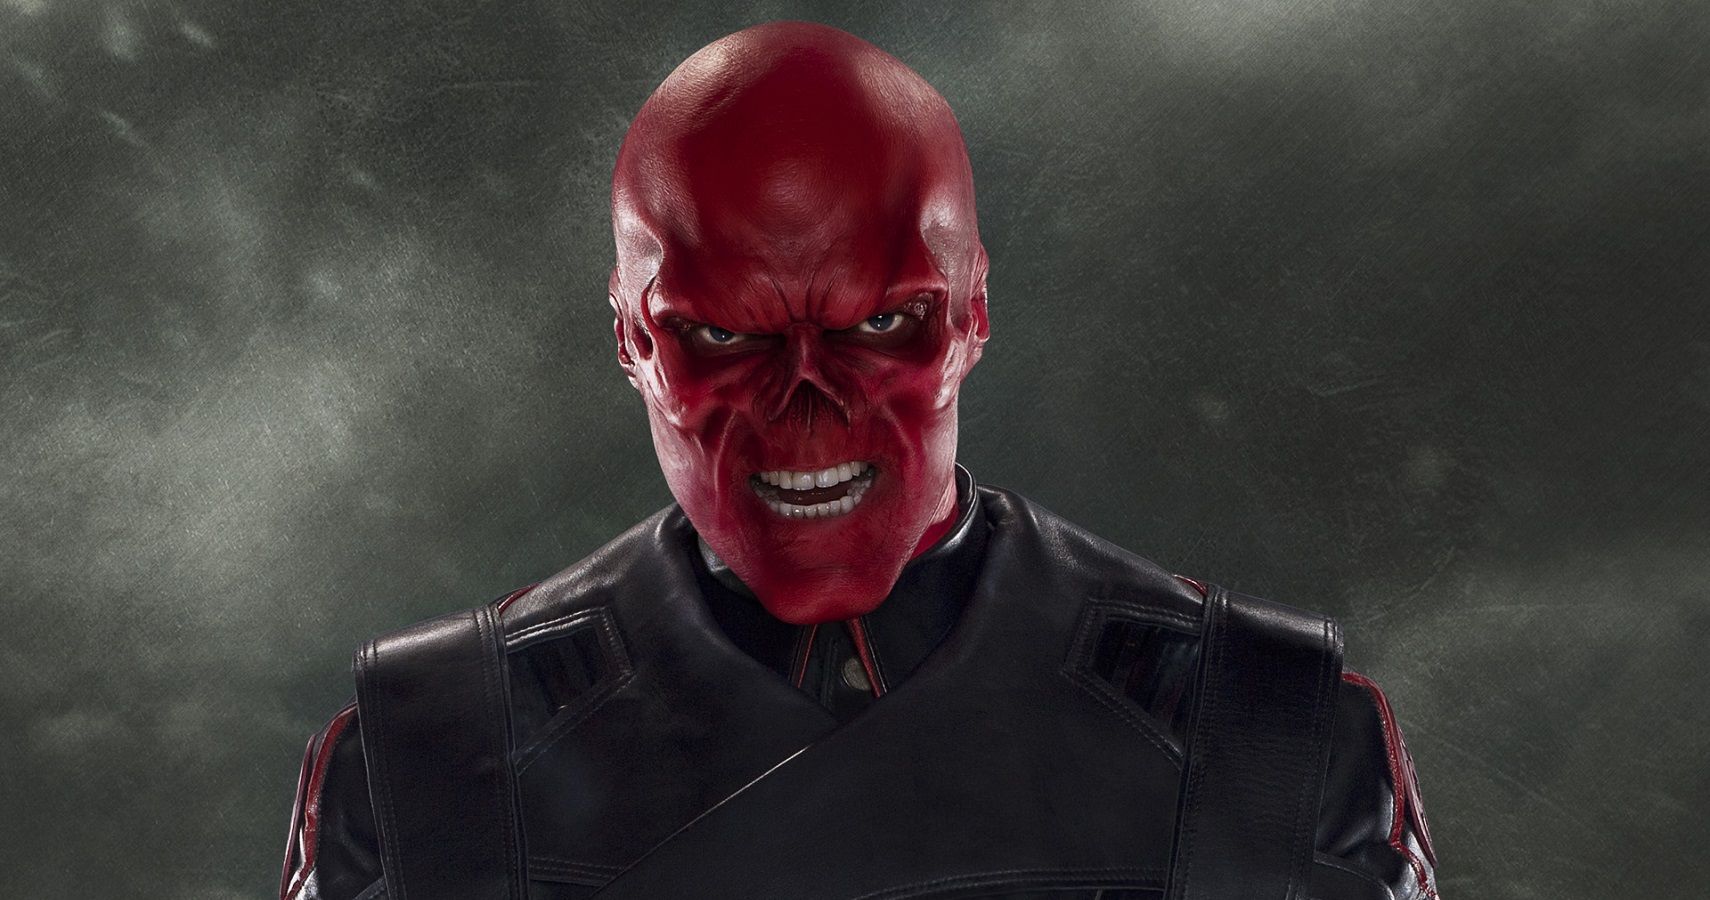 Væk relæ veteran 10 Facts About The Red Skull The MCU Never Explored